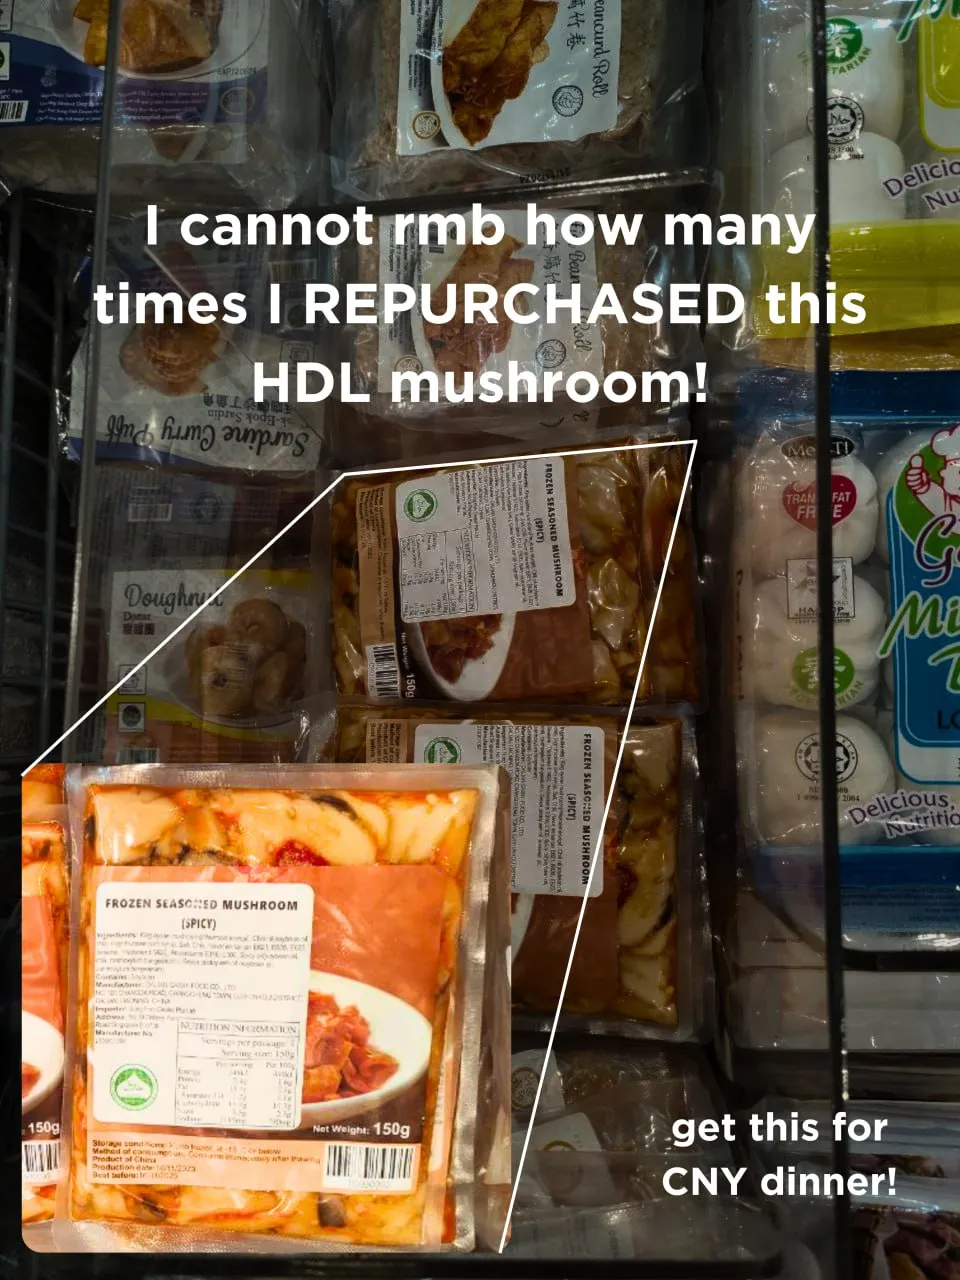 CNY dinner MUST HAVE! 🧨🍲 LESS than $3 HDL mushroom's images